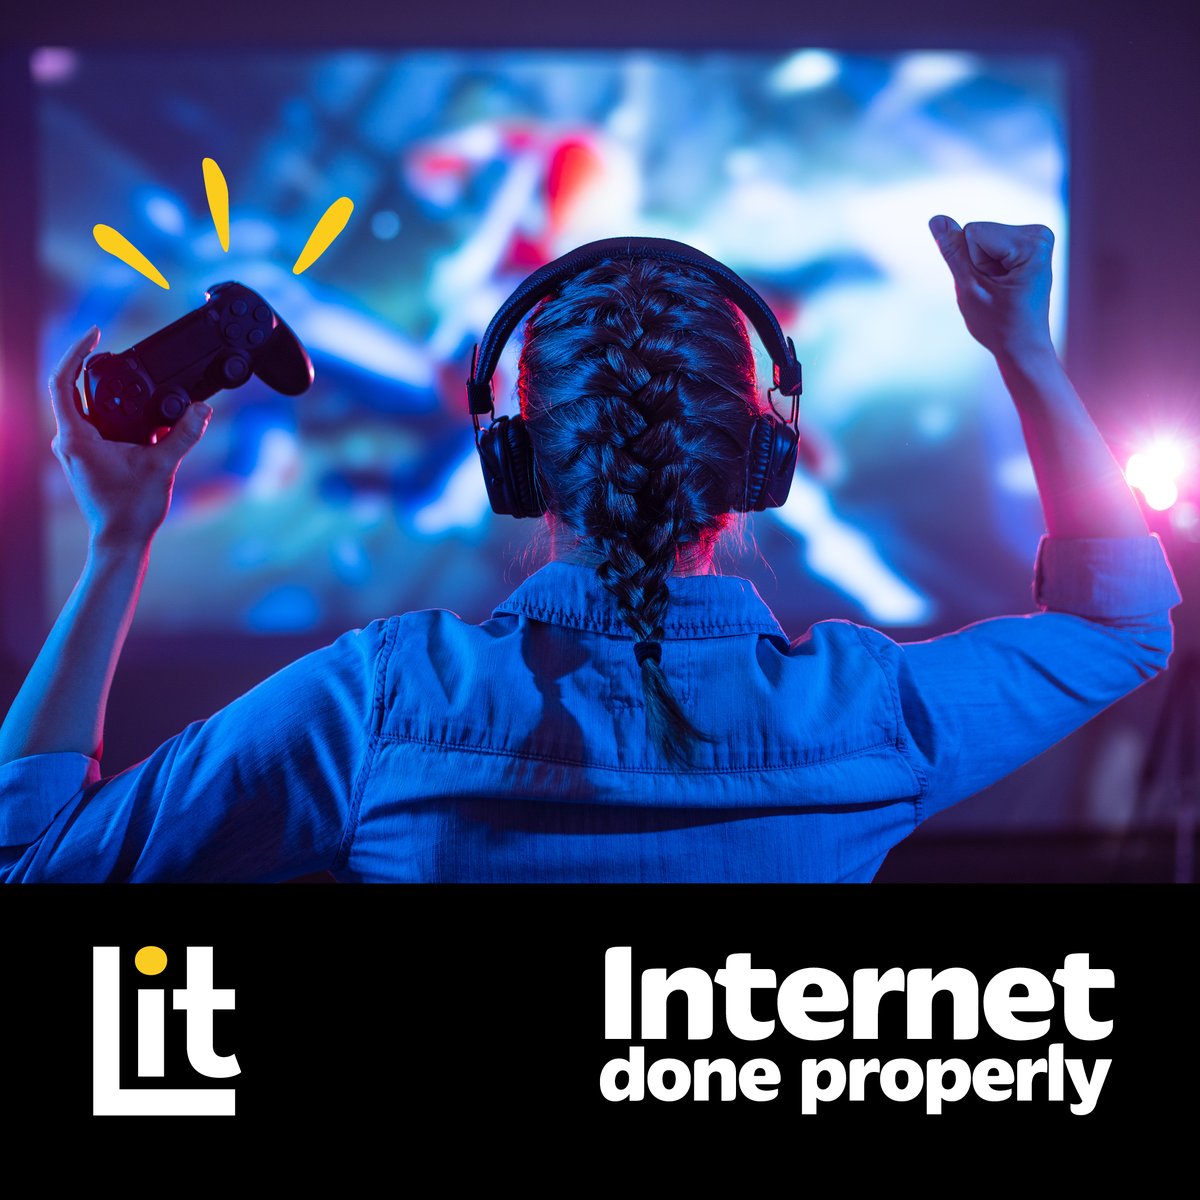 Half-term is round the corner, and while the kids gear for their gaming marathons, you can still work from home with lightning-fast downloads! With full-fibre, everyone gets Internet Done Properly, no matter how many devices are online ✨ We’ve got you: litfibre.com